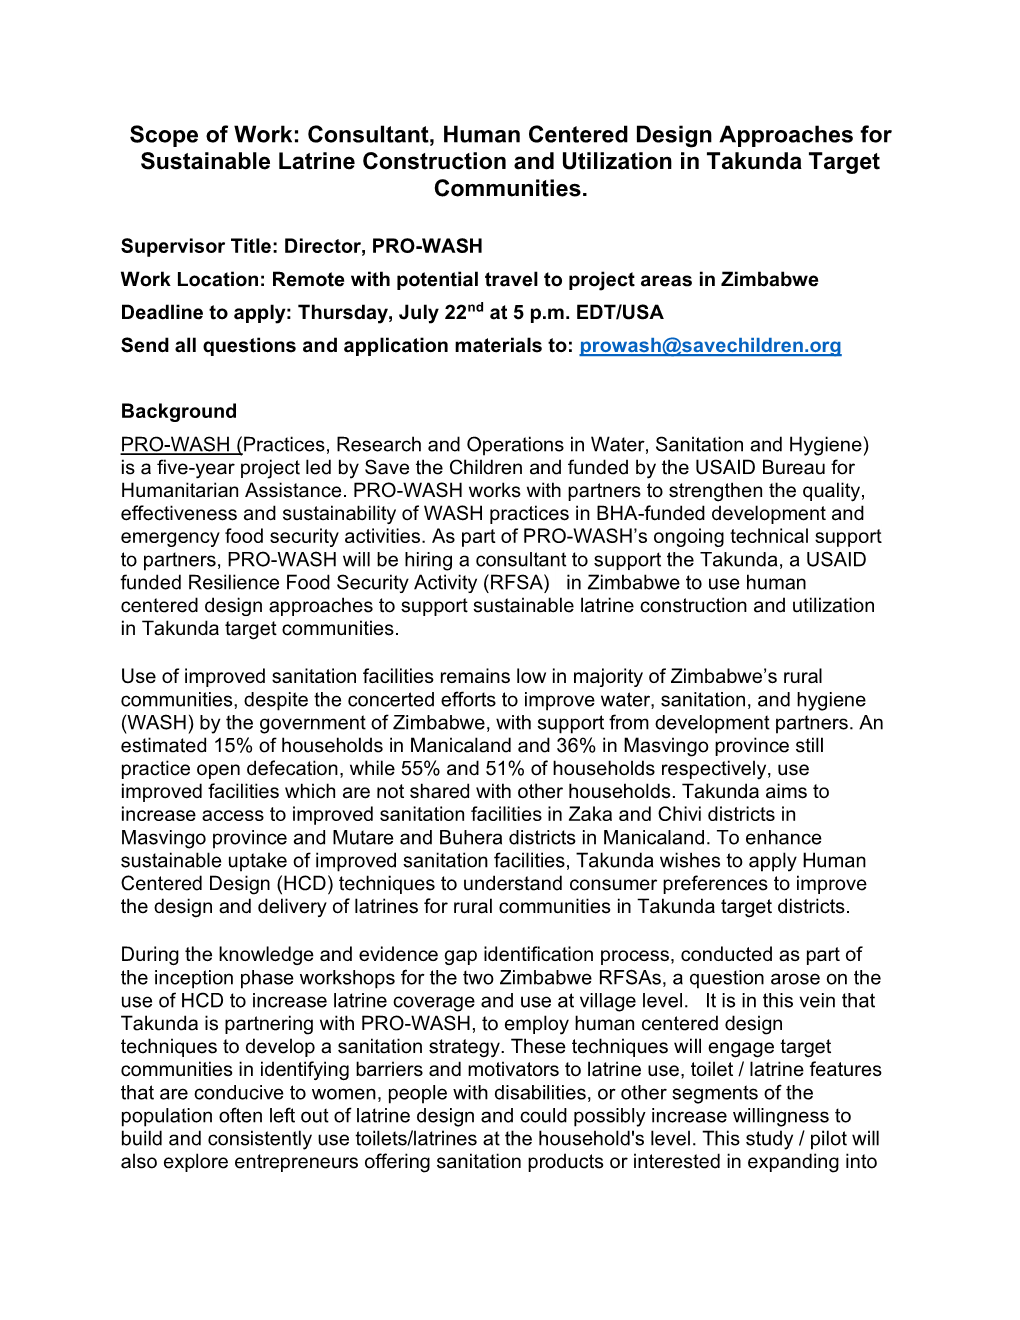 Consultant, Human Centered Design Approaches for Sustainable Latrine Construction and Utilization in Takunda Target Communities